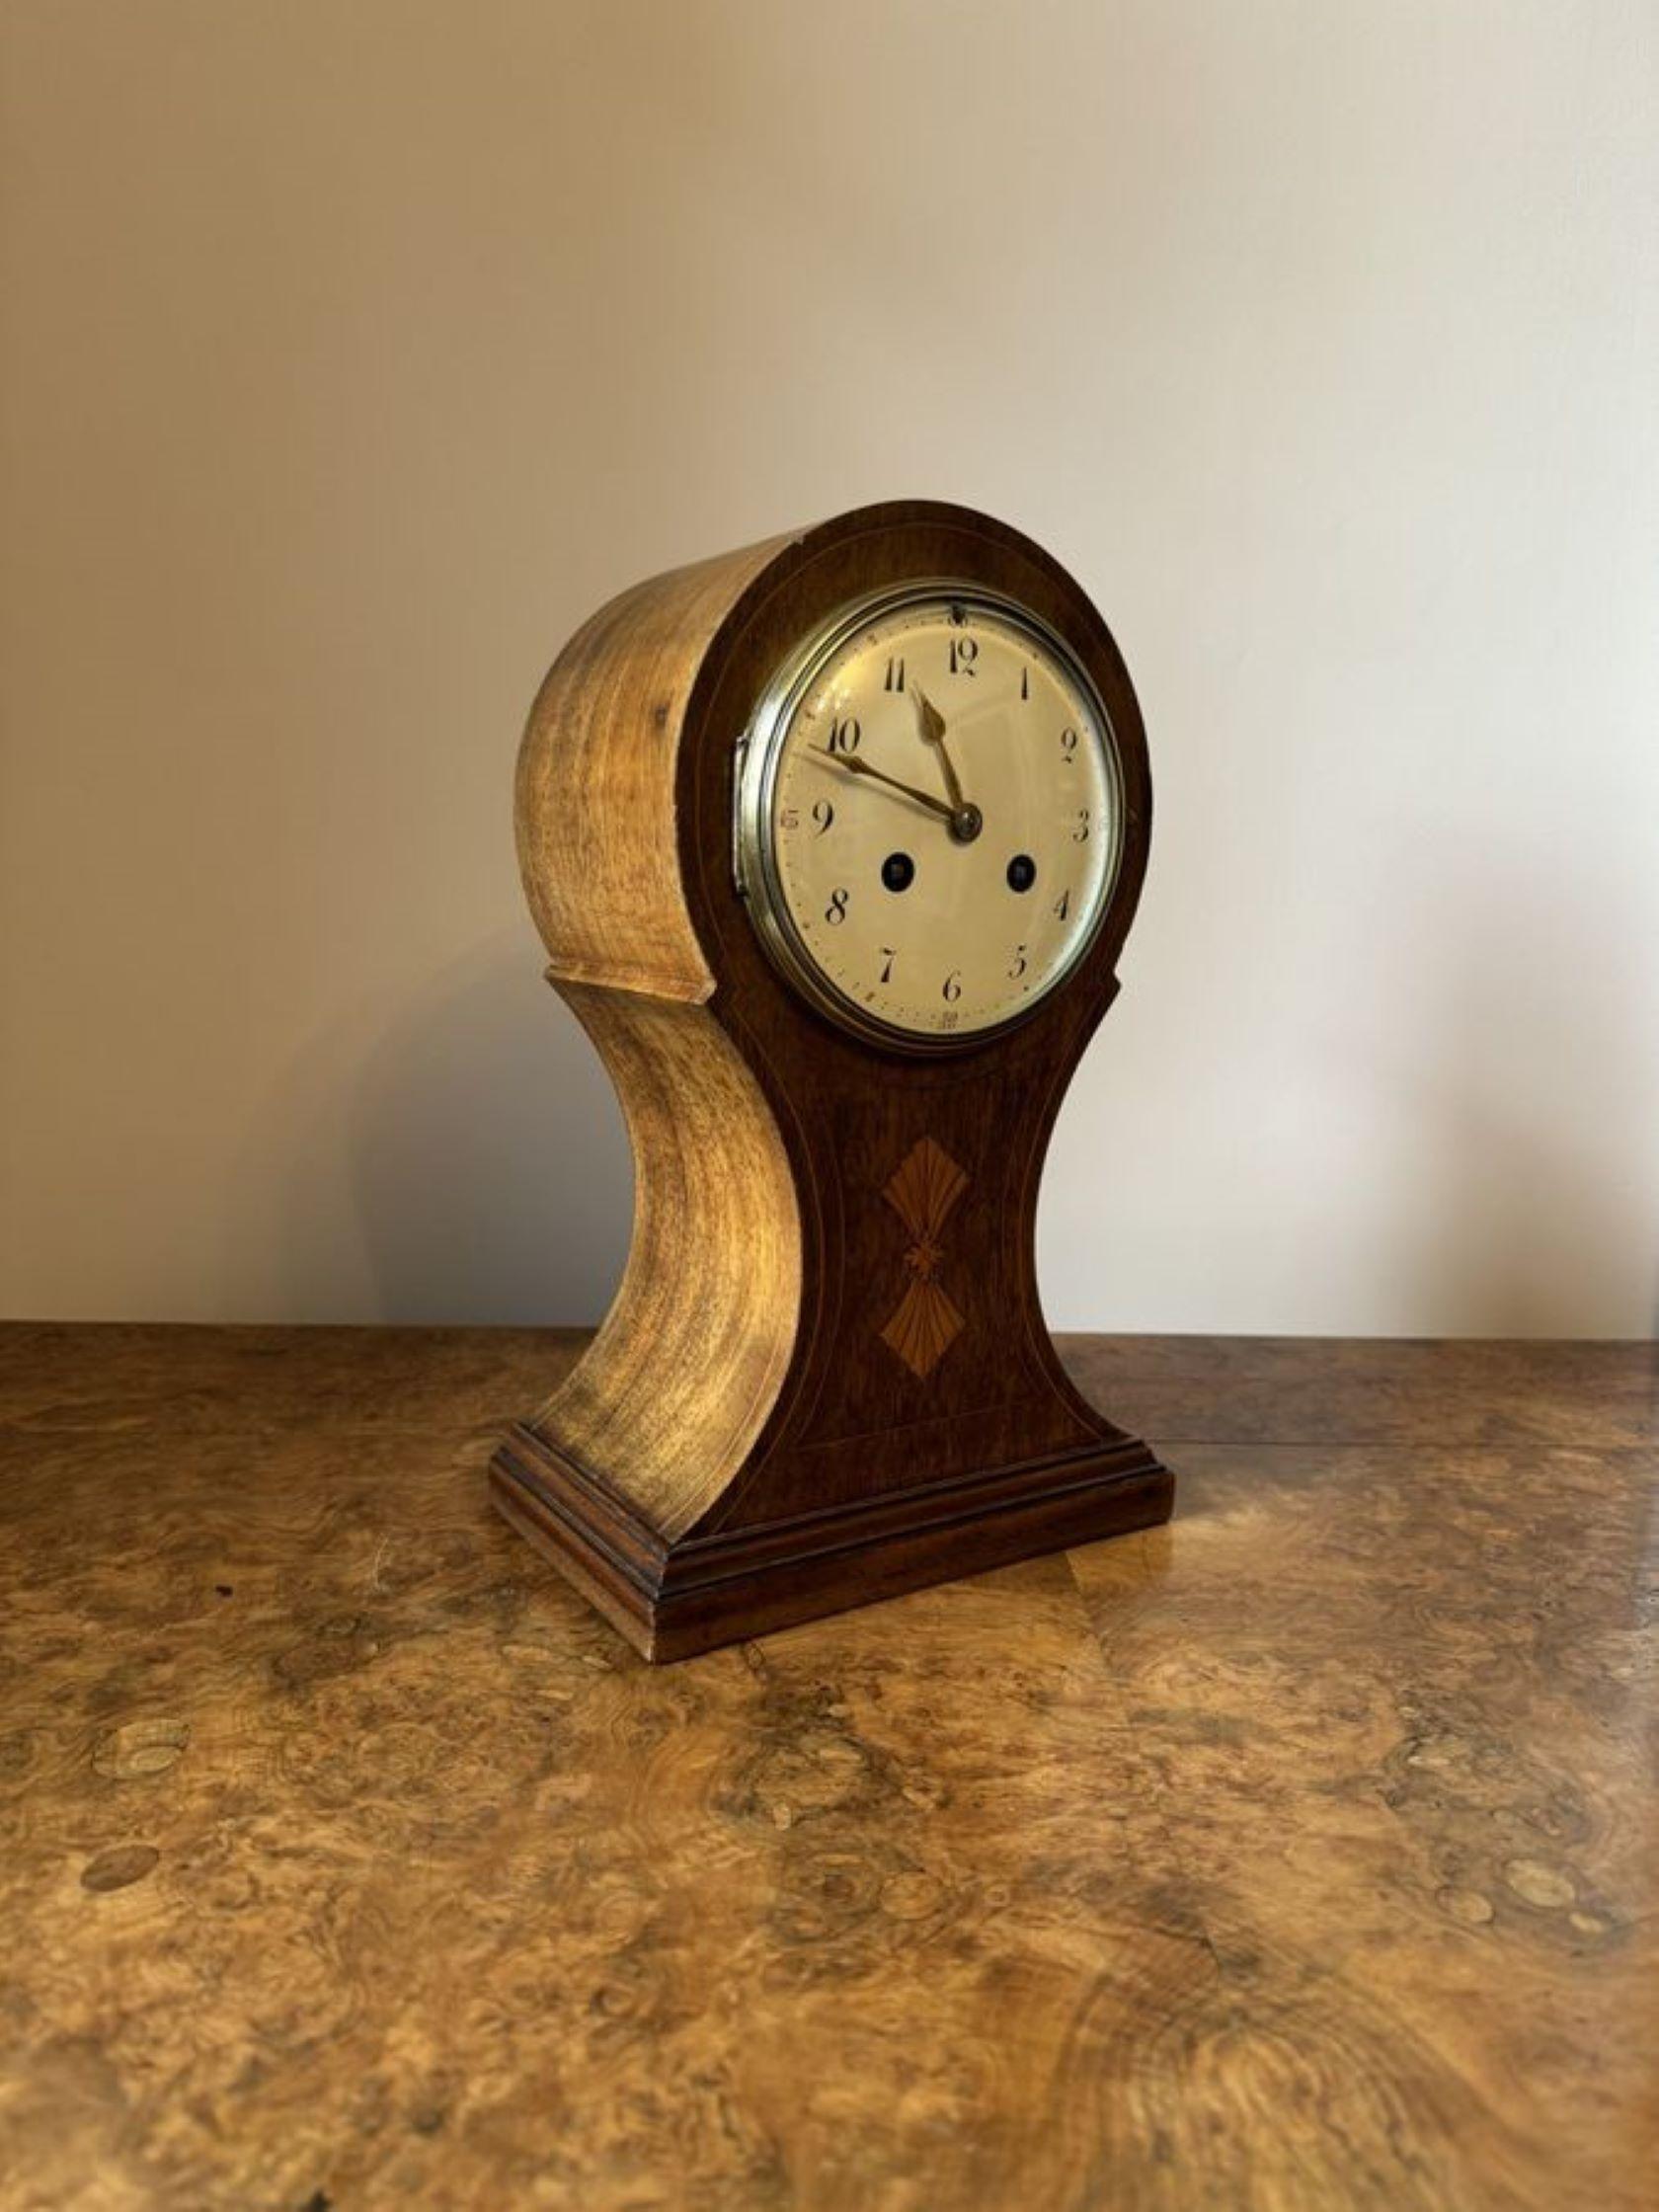 Wonderful quality antique Edwardian mahogany inlaid balloon shaped mantle clock, having a quality mahogany satinwood inlaid balloon shaped case with a white enamel dial and Arabic numerals. 

D. 1900